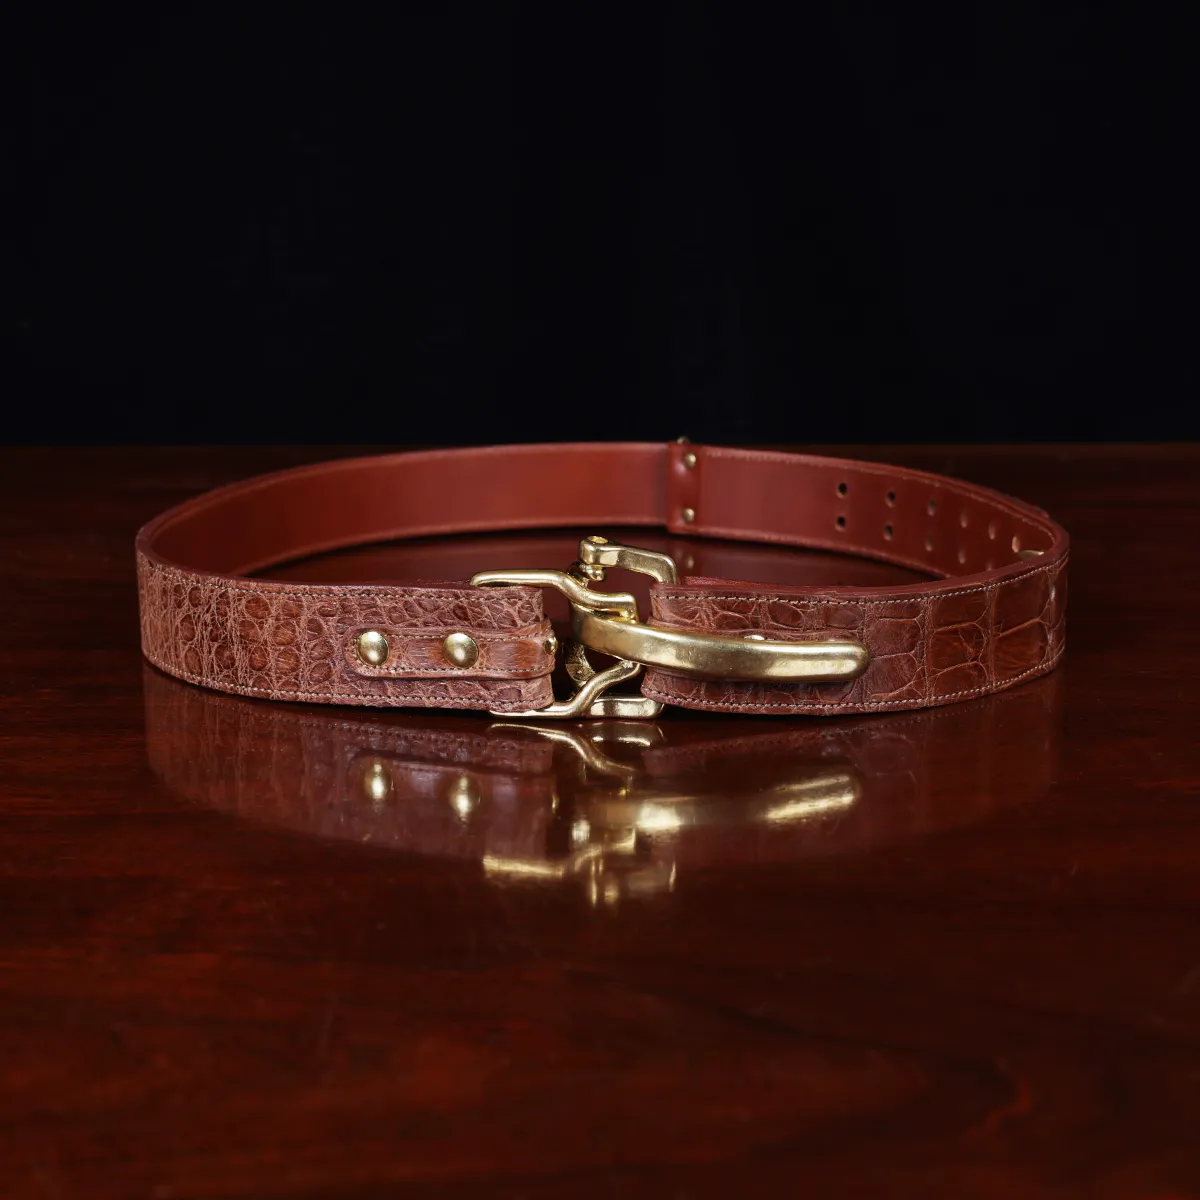 Colonel Littleton No. 1 Leather Belt - Italian Bridle Leather - Black Leather with Nickel, Large. Adjusts to Fit Sizes 34 - 42